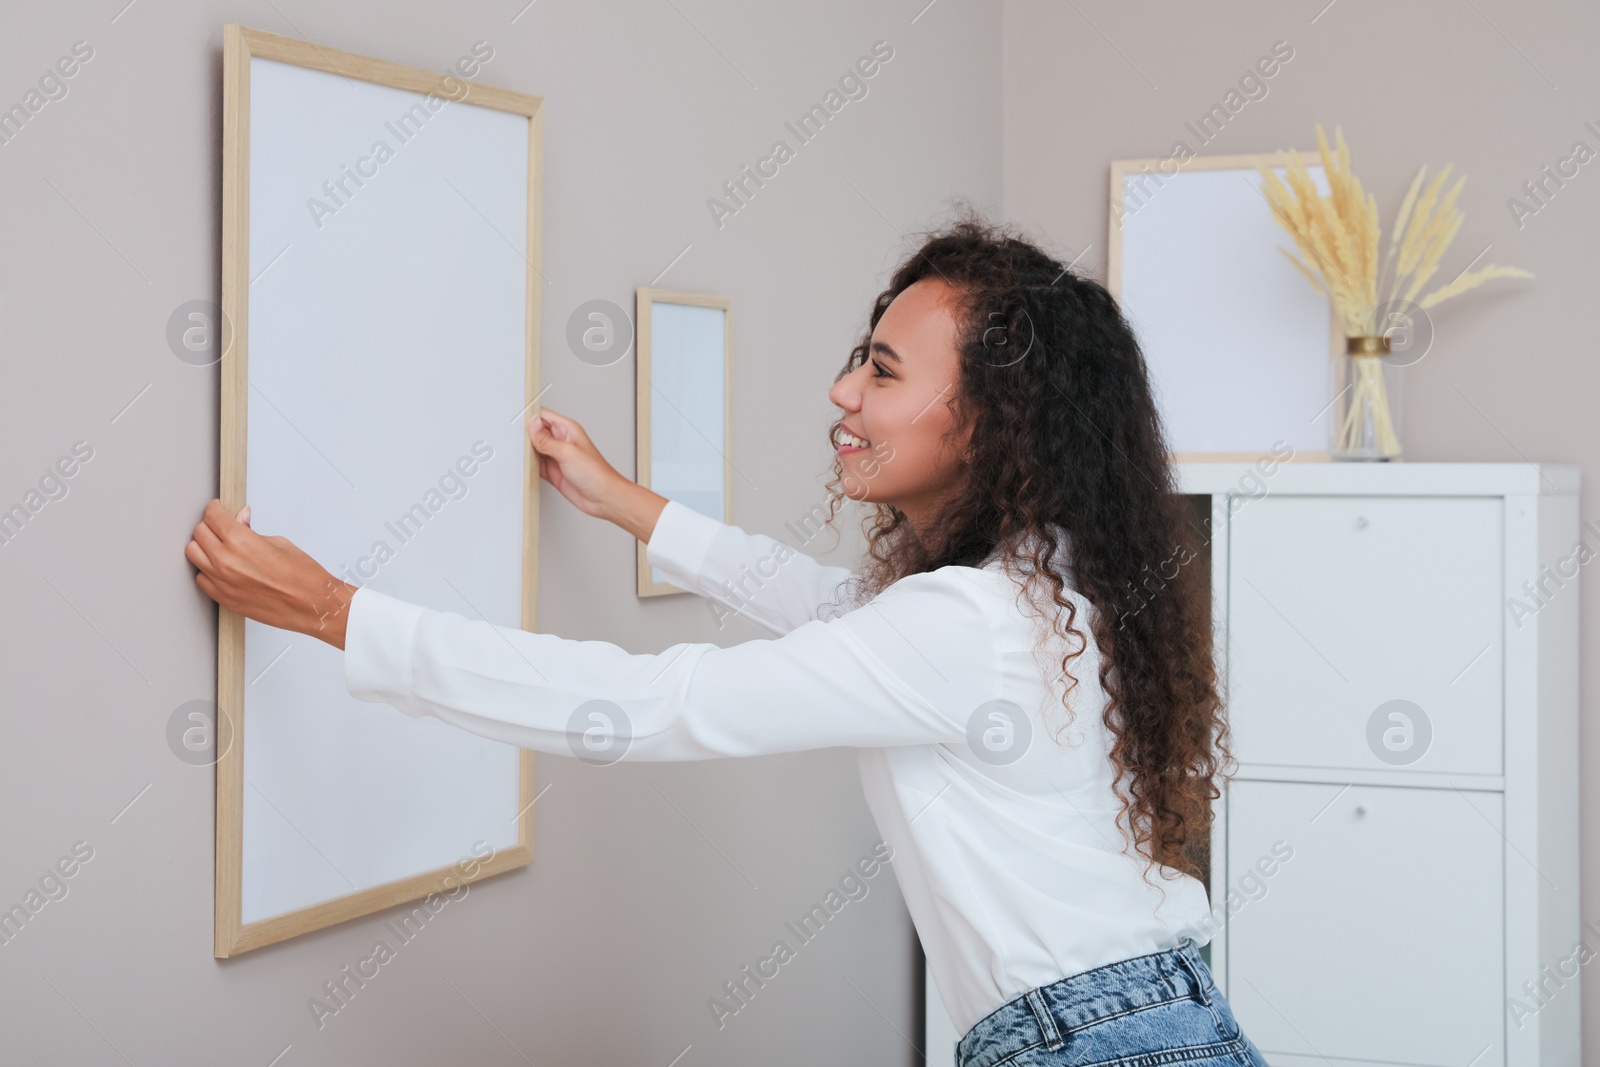 Photo of Happy African American woman hanging empty frame on pale rose wall in room. Mockup for design